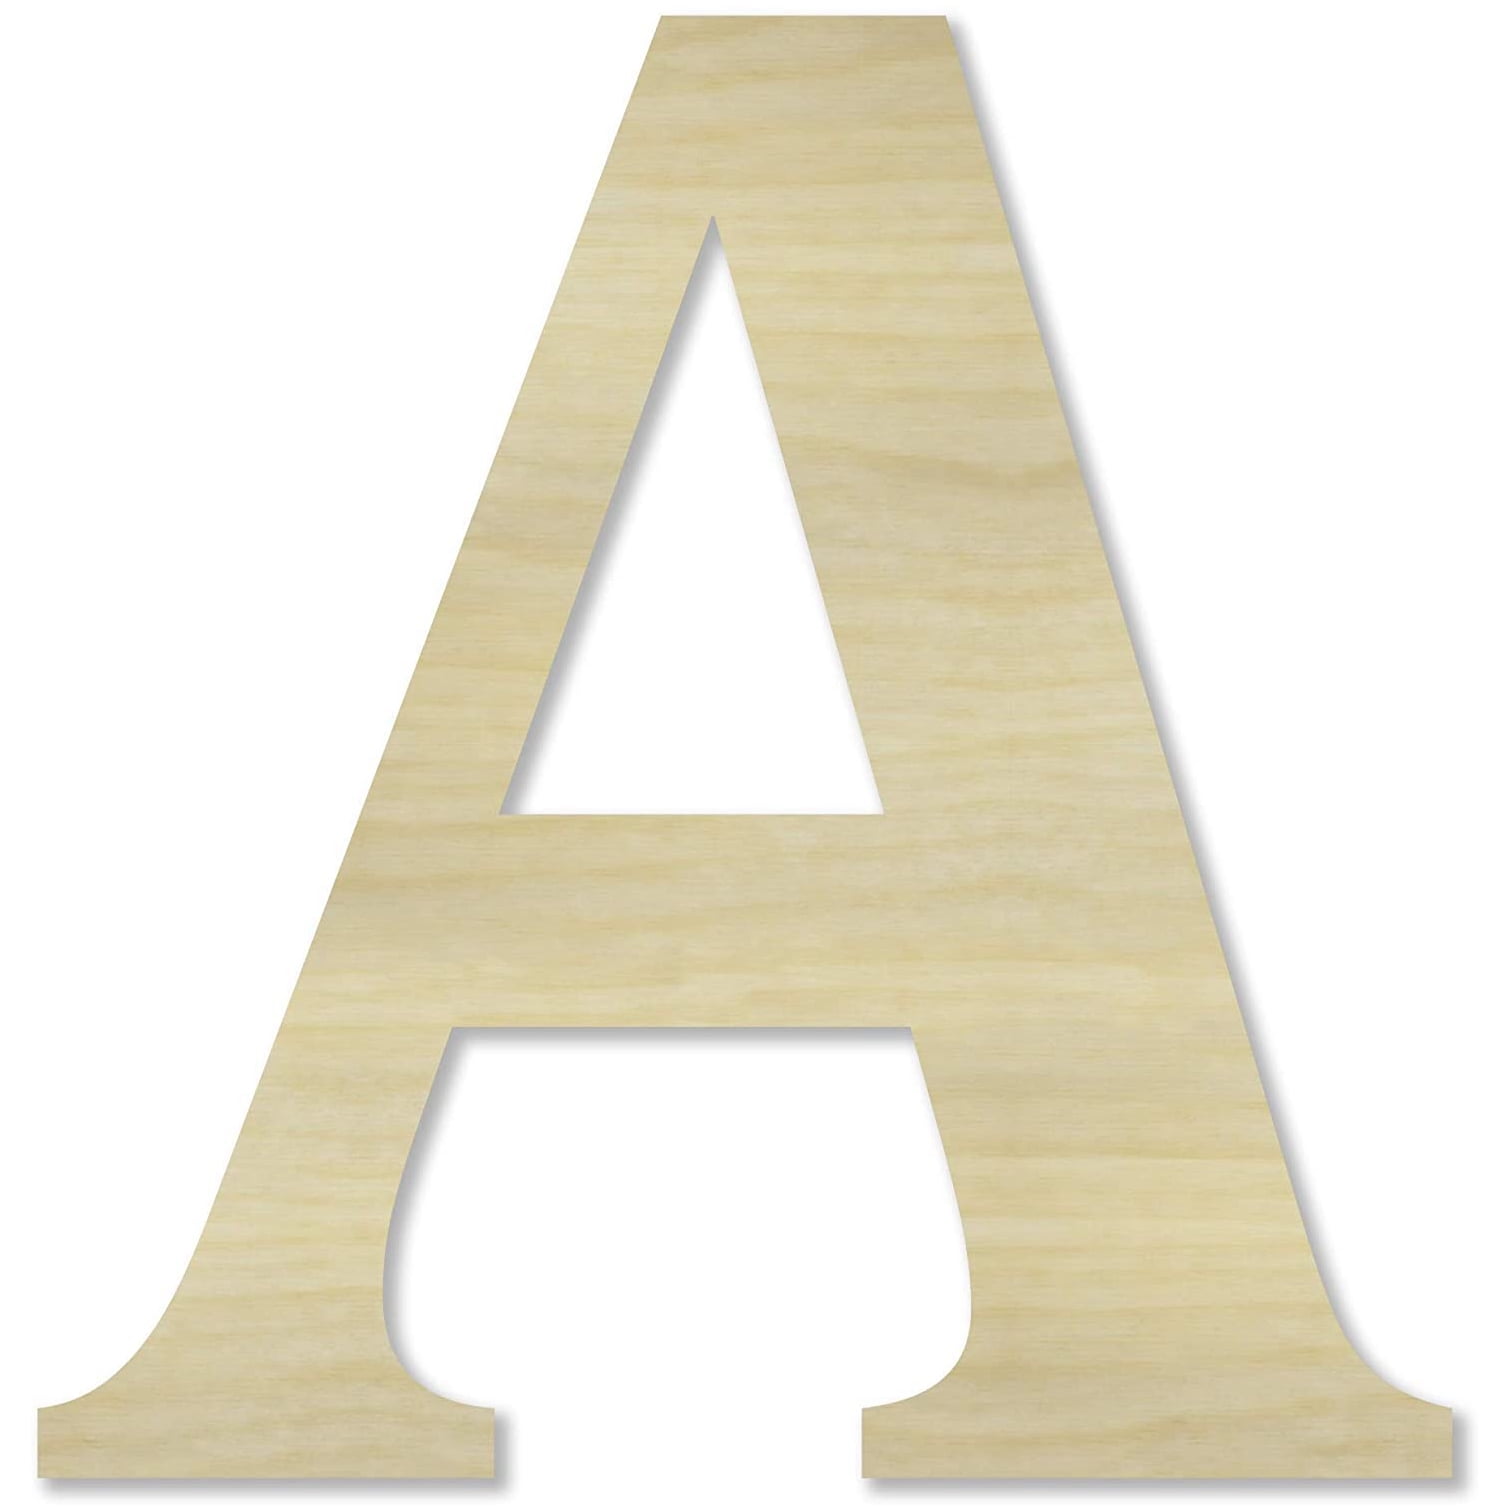 Price is per letter Wood MDF Word and Letters Cut Out 50cm tall 